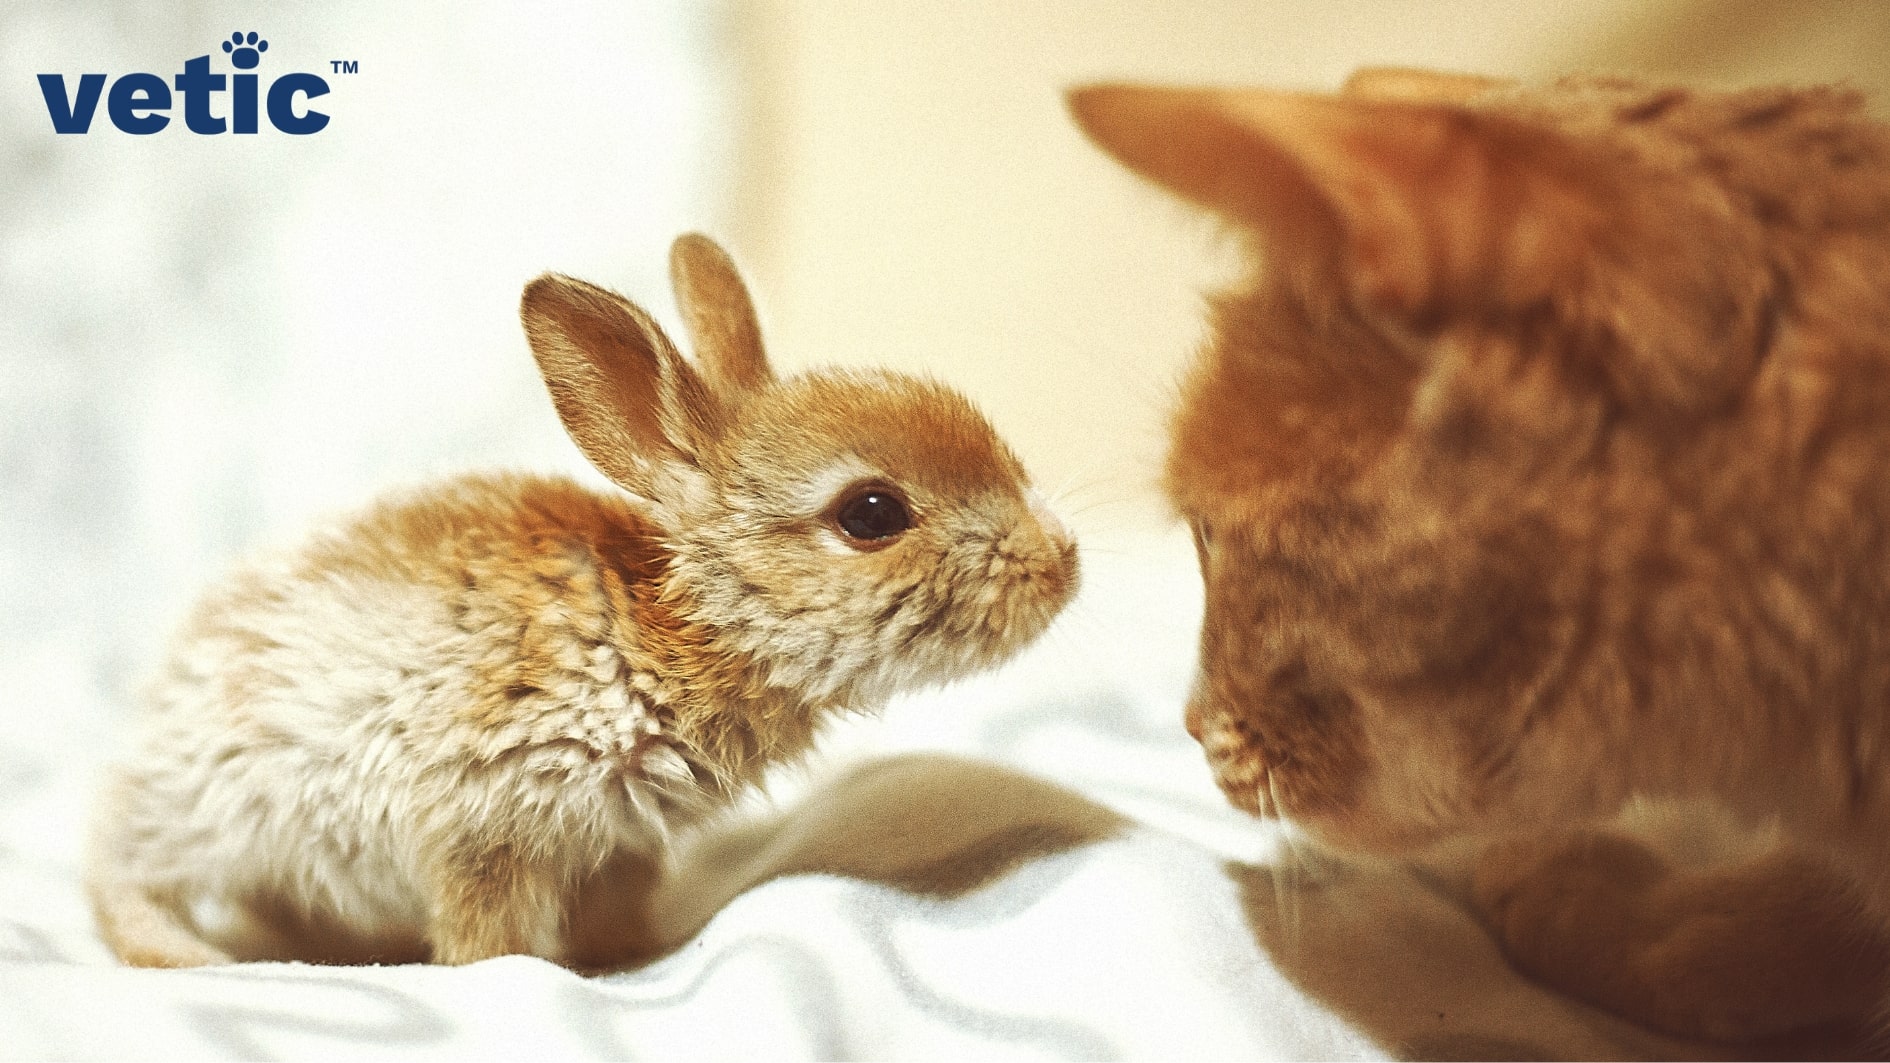 An orange cat looks on as a small brown and white rabbit tries to get close. Cats do not typically get along well with smaller animals since their hunting instincts kick in.